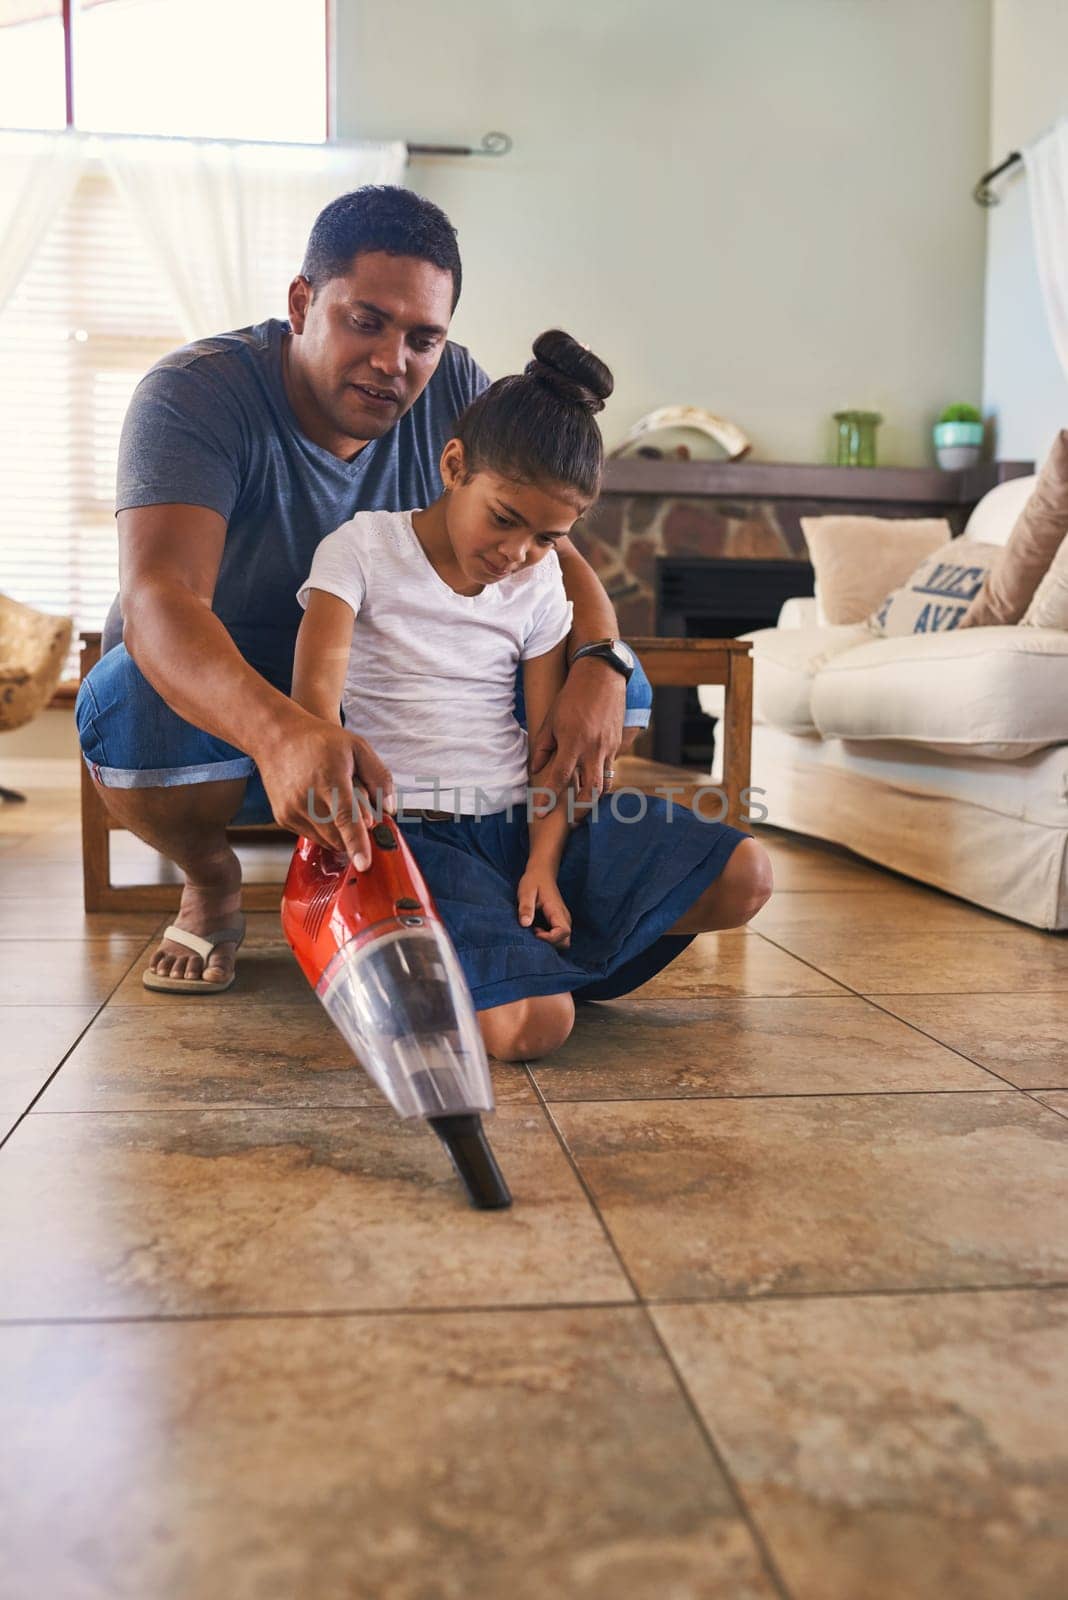 Parent, child and cleaning by vacuum floor of living room of house as teamwork to learning responsibility at home. Family, chores and care by helping, bonding and cooperation for natural growth by YuriArcurs